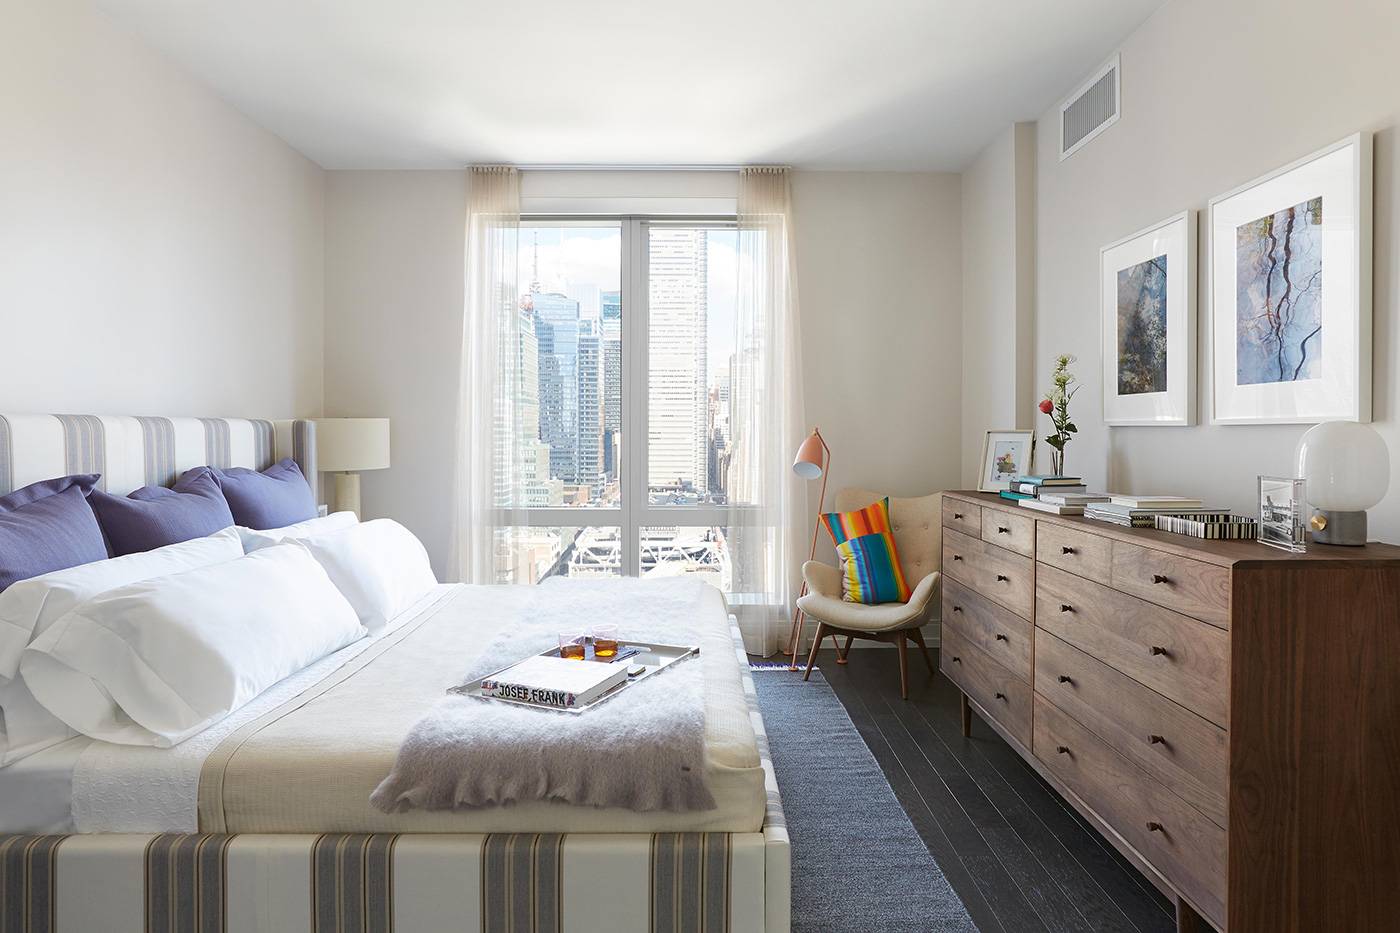 RENTAL 10th AVE BETWEEN W40TH ST & W41ST BEAUTIFUL HUDSON YARDS TIMES SQUARE HELL'S KITCHEN MIDTOWN WESTSIDE